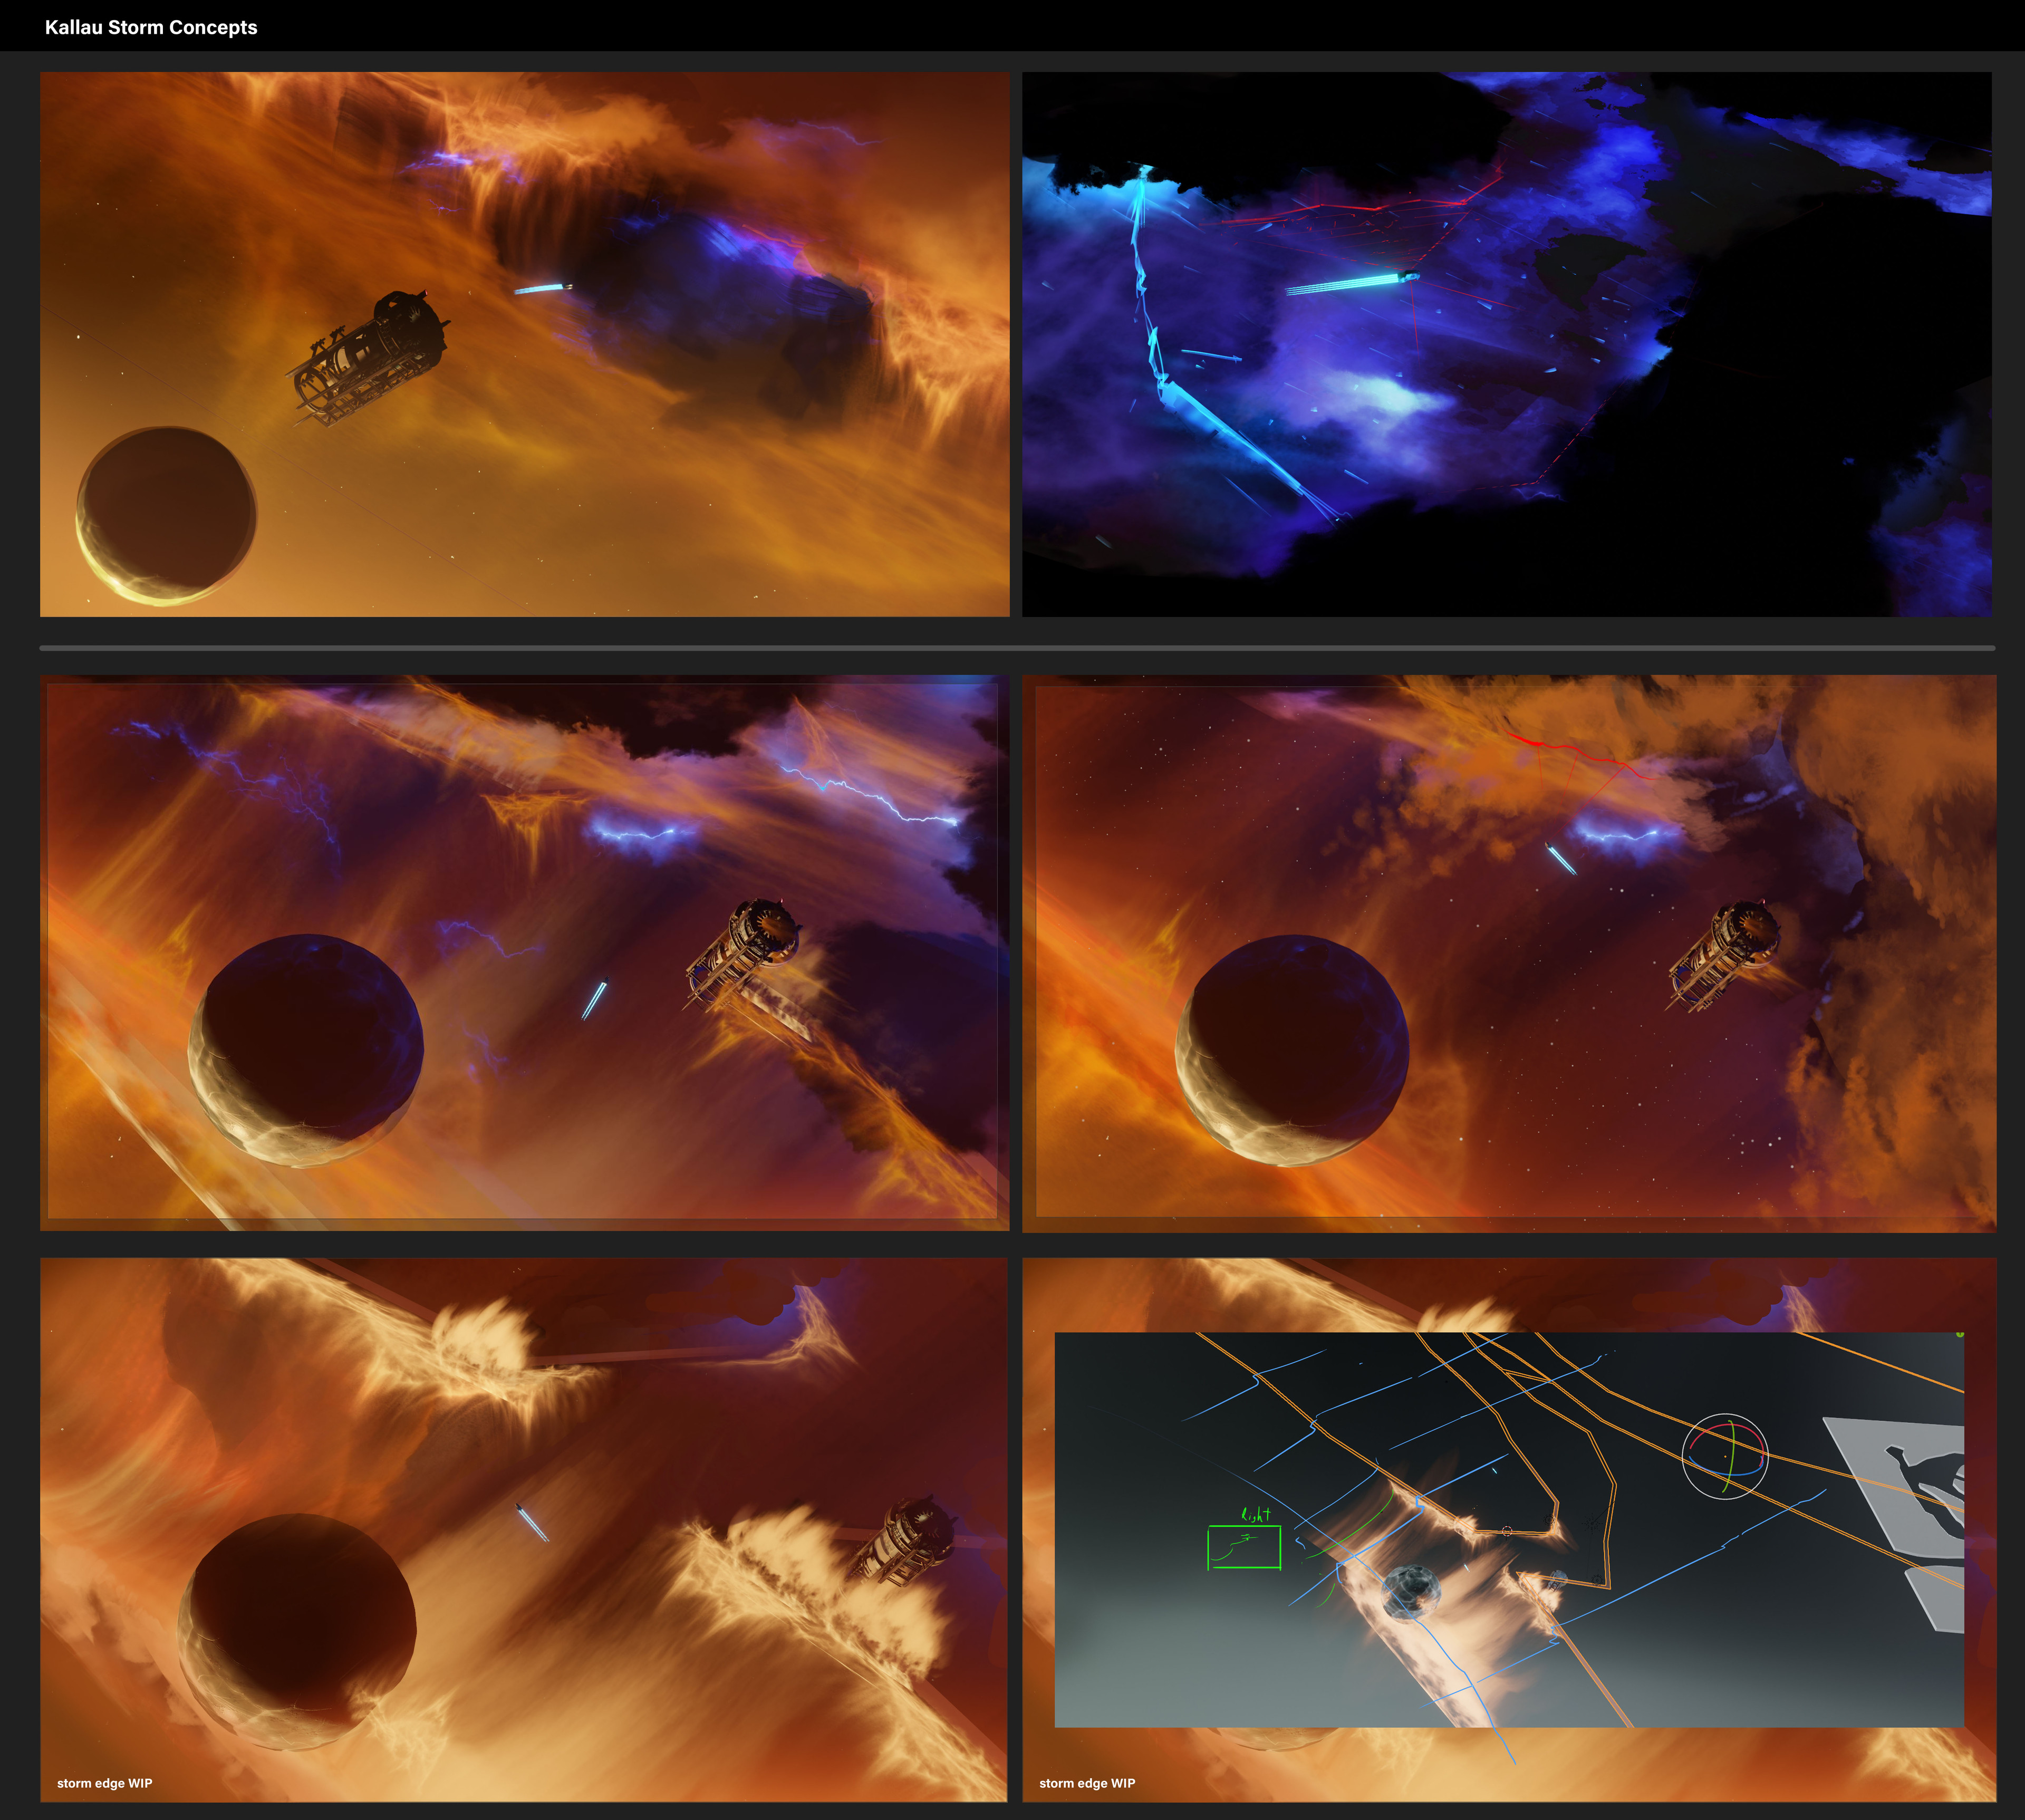 Space storm VFX concepts built in blender and then painted over. The concepts were built around Design's desire to enter the storm and navigate it like a maze. The storm tech we built inherited its' shape from the ProBuilder meshes design handed us.